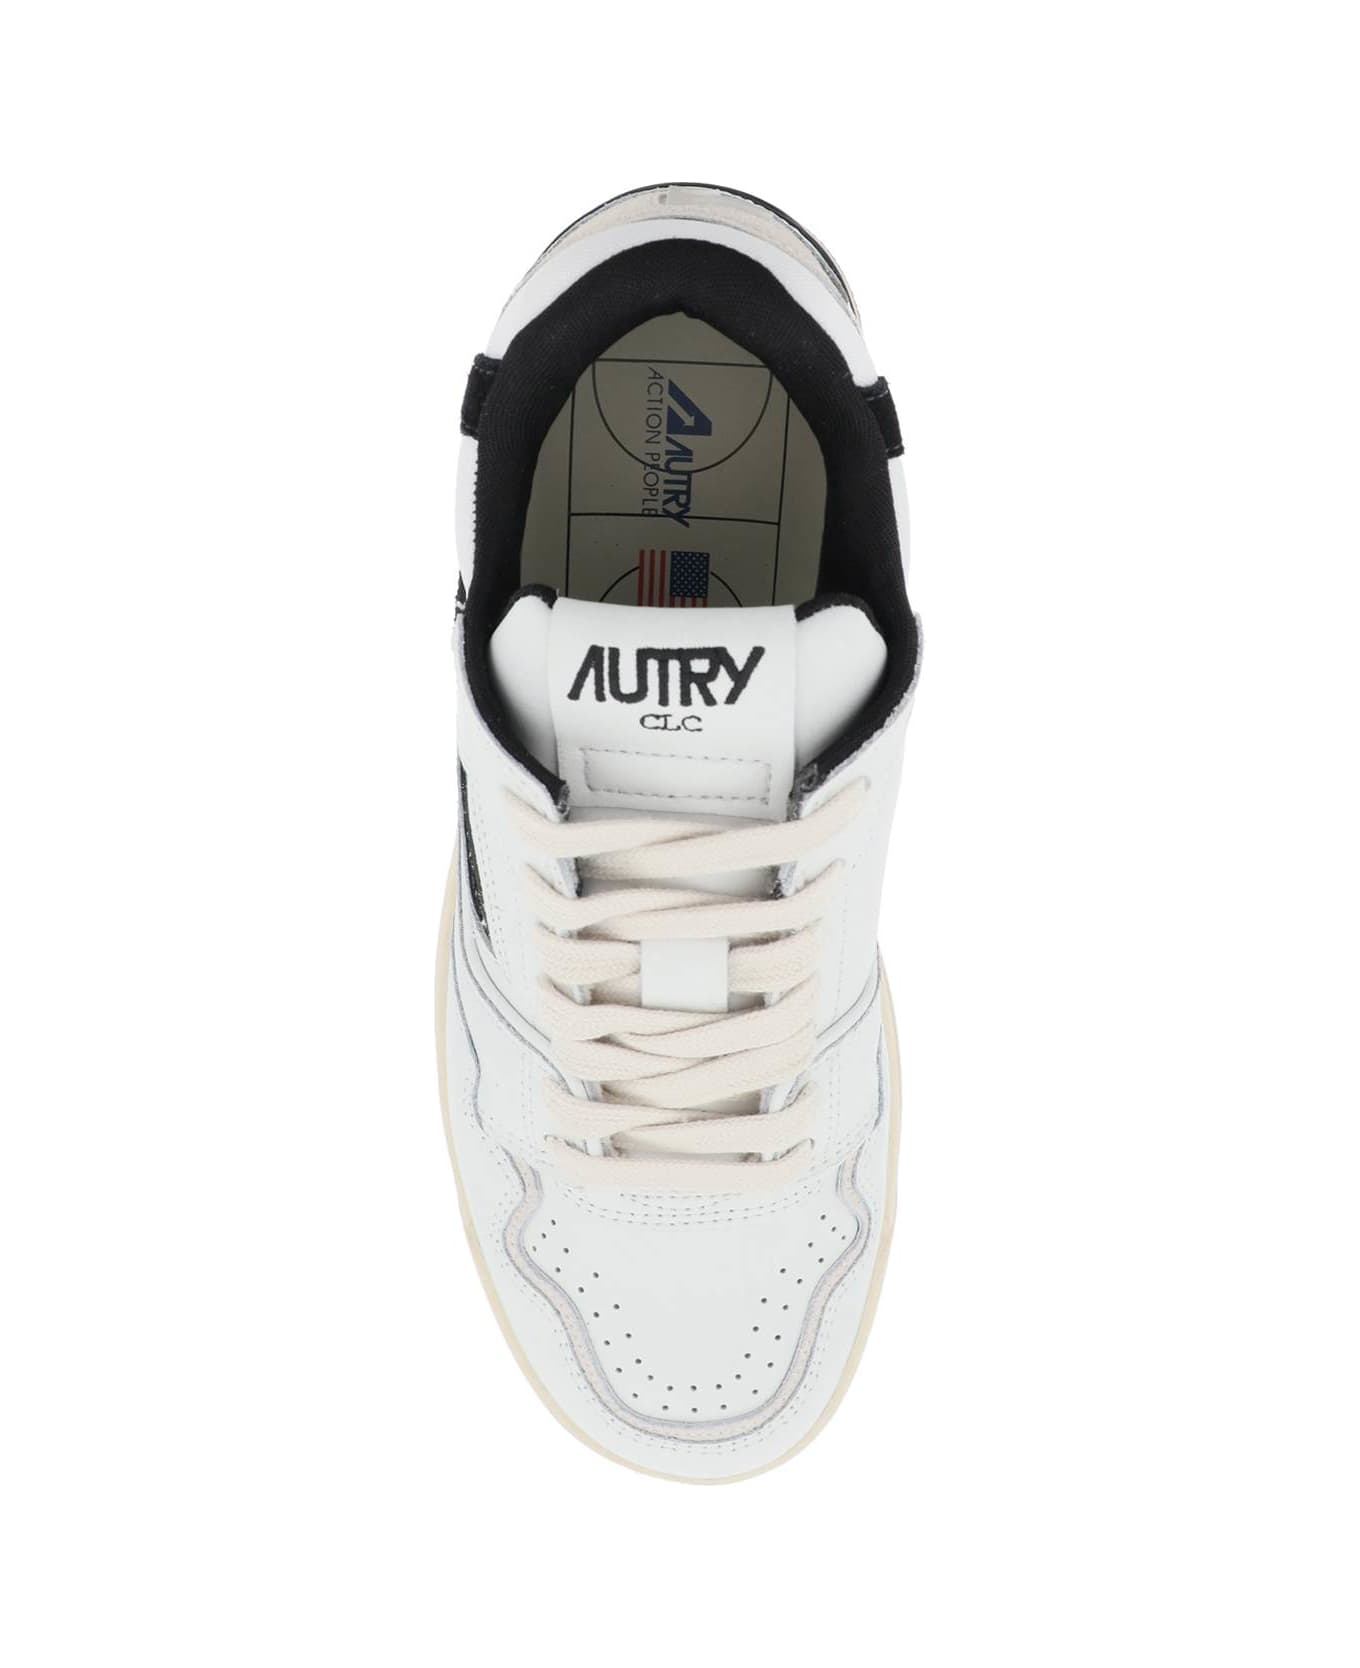 Autry Clc Low Sneakers - White スニーカー